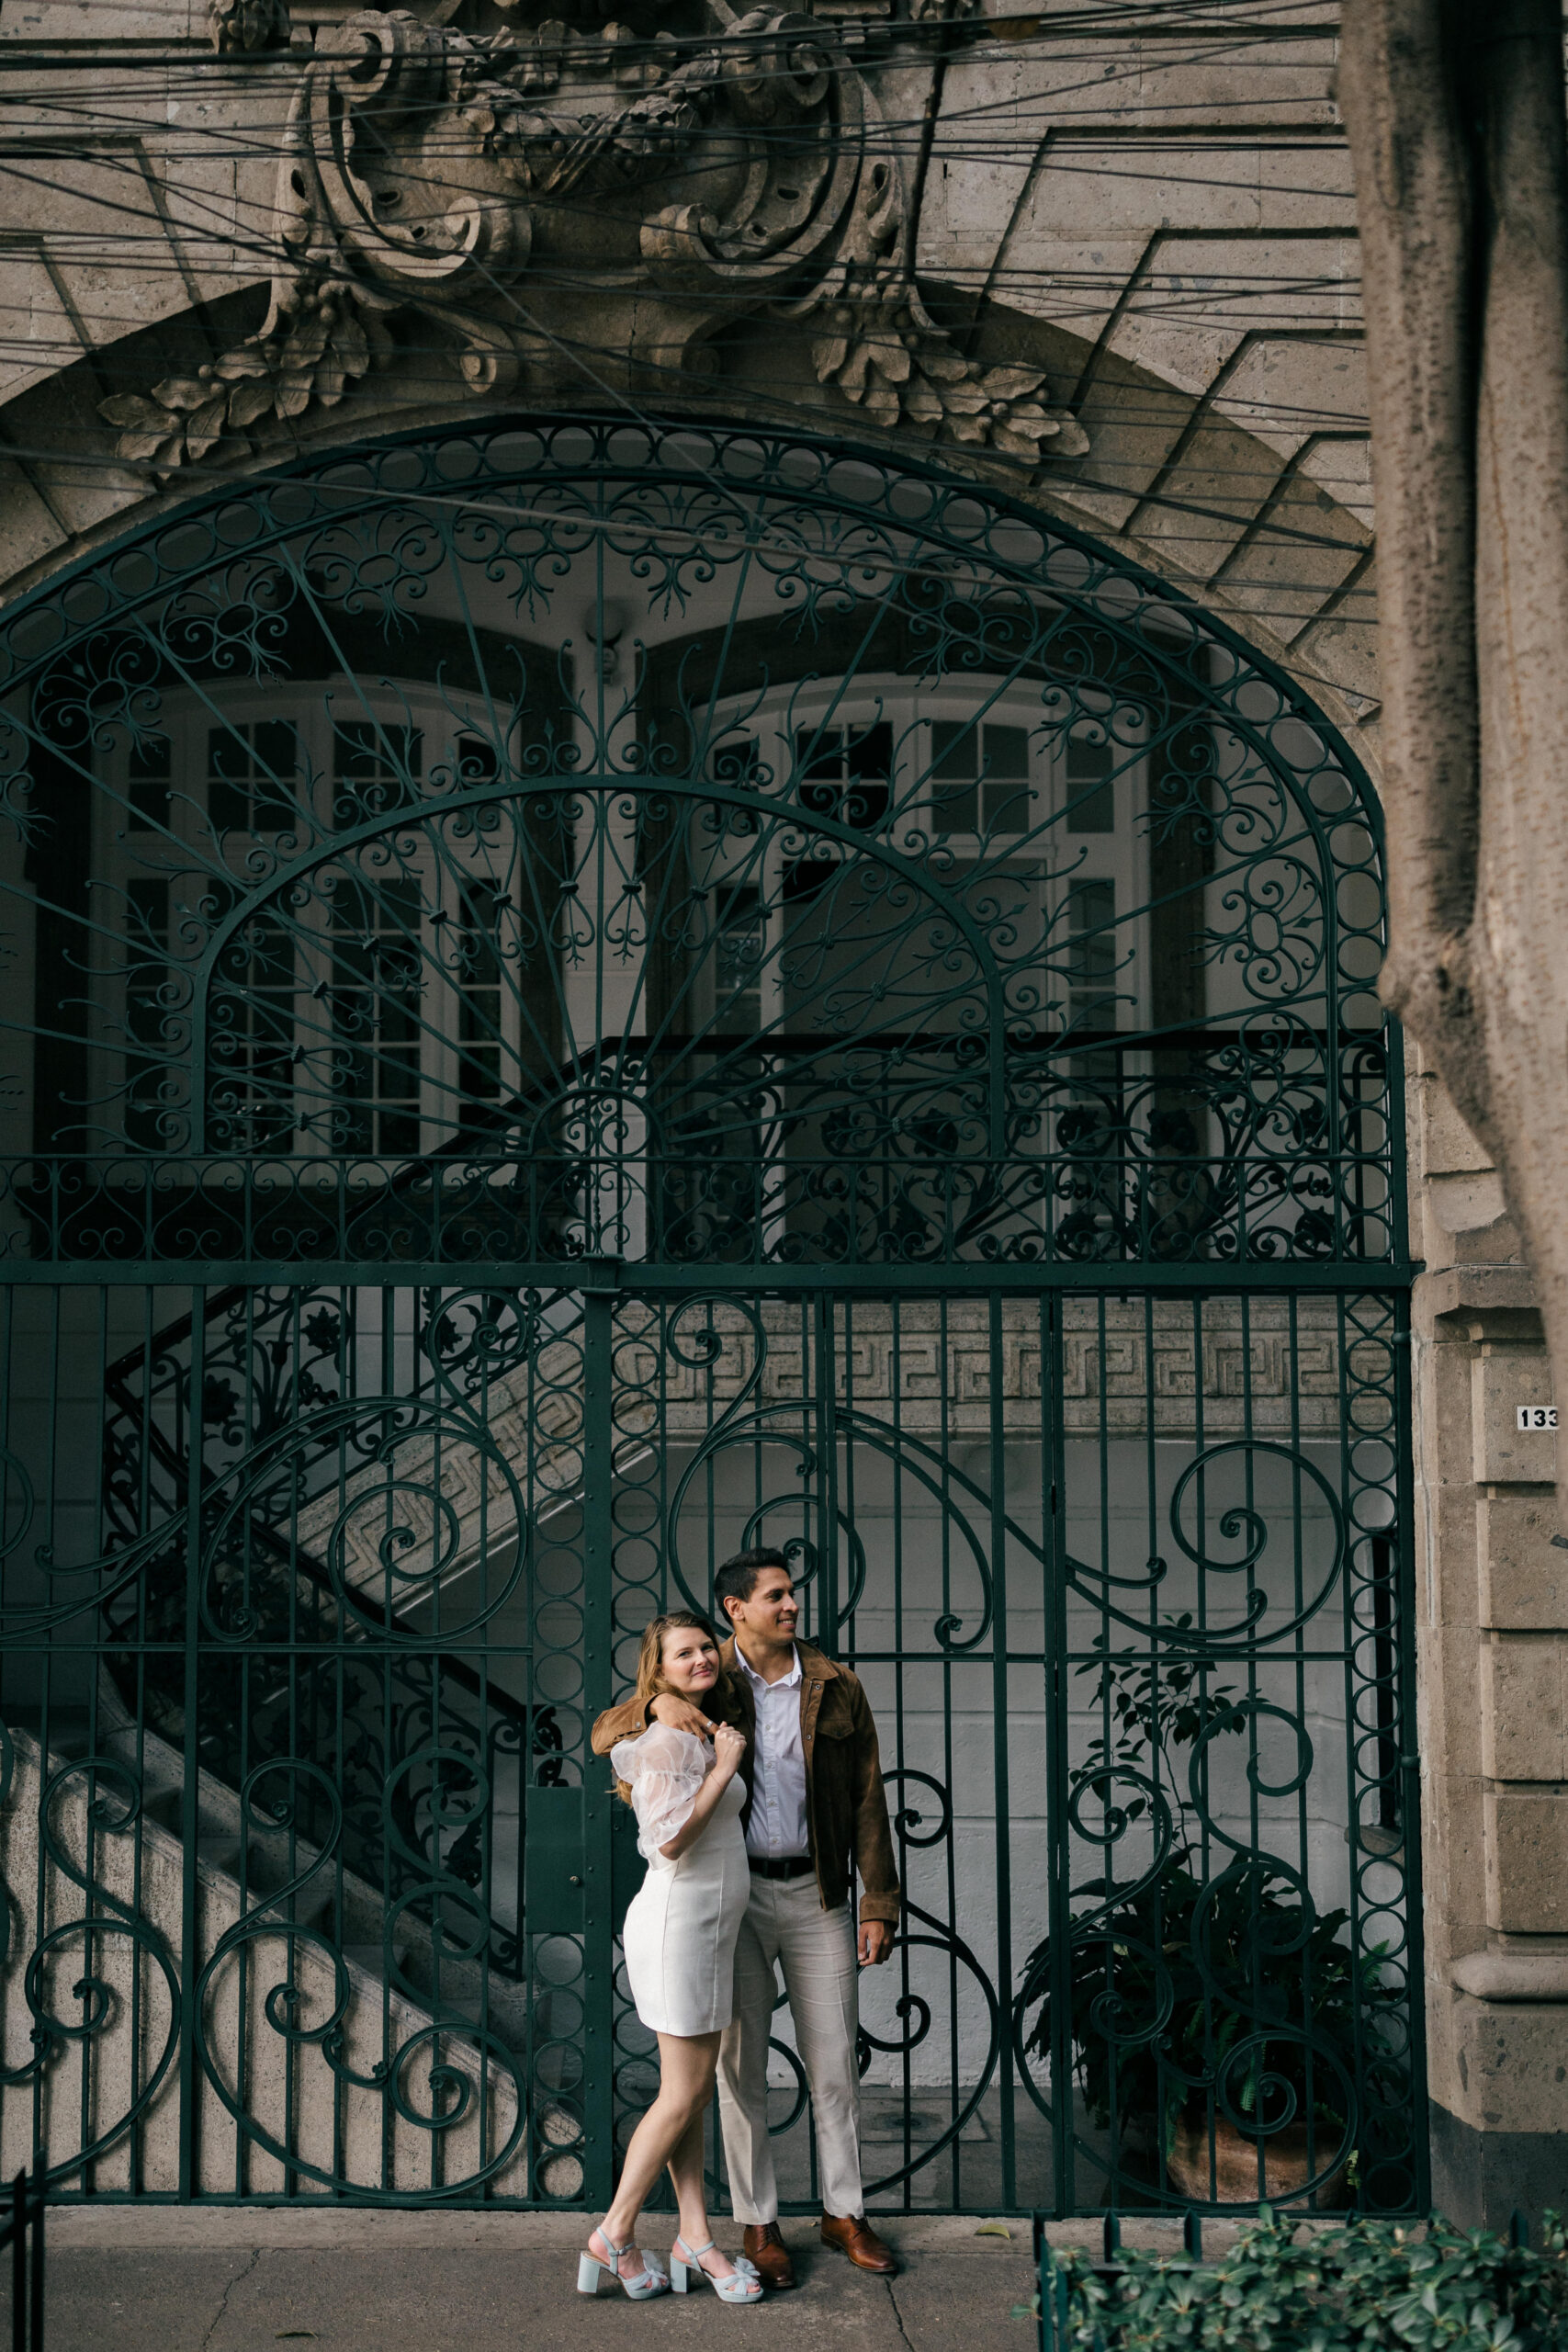 Dreamy couple pose together in front of wrought iron gate 